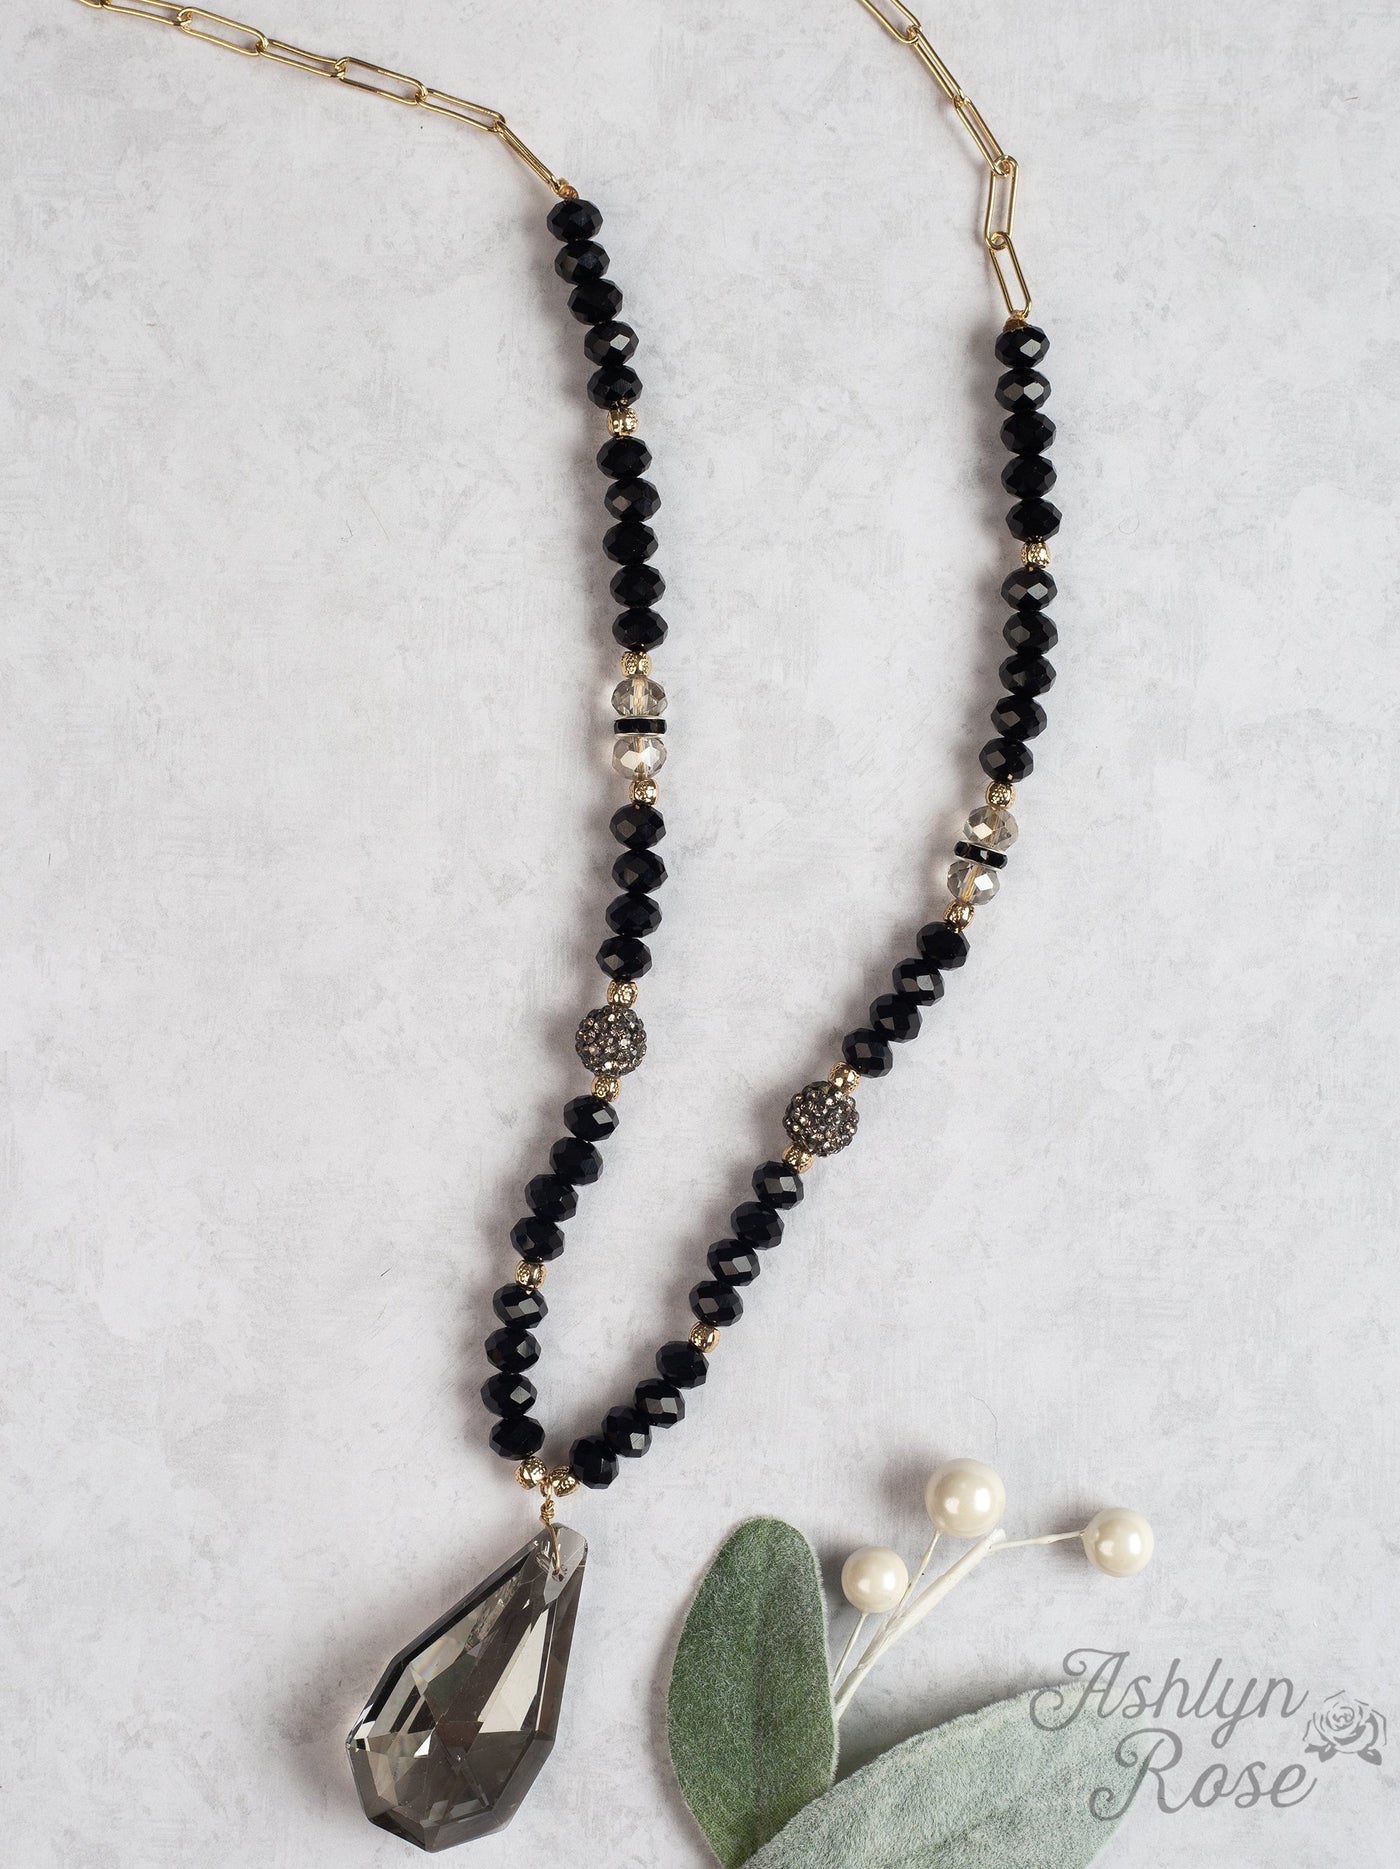 Take Your Time Beaded Necklace with Teardrop Stone, Black